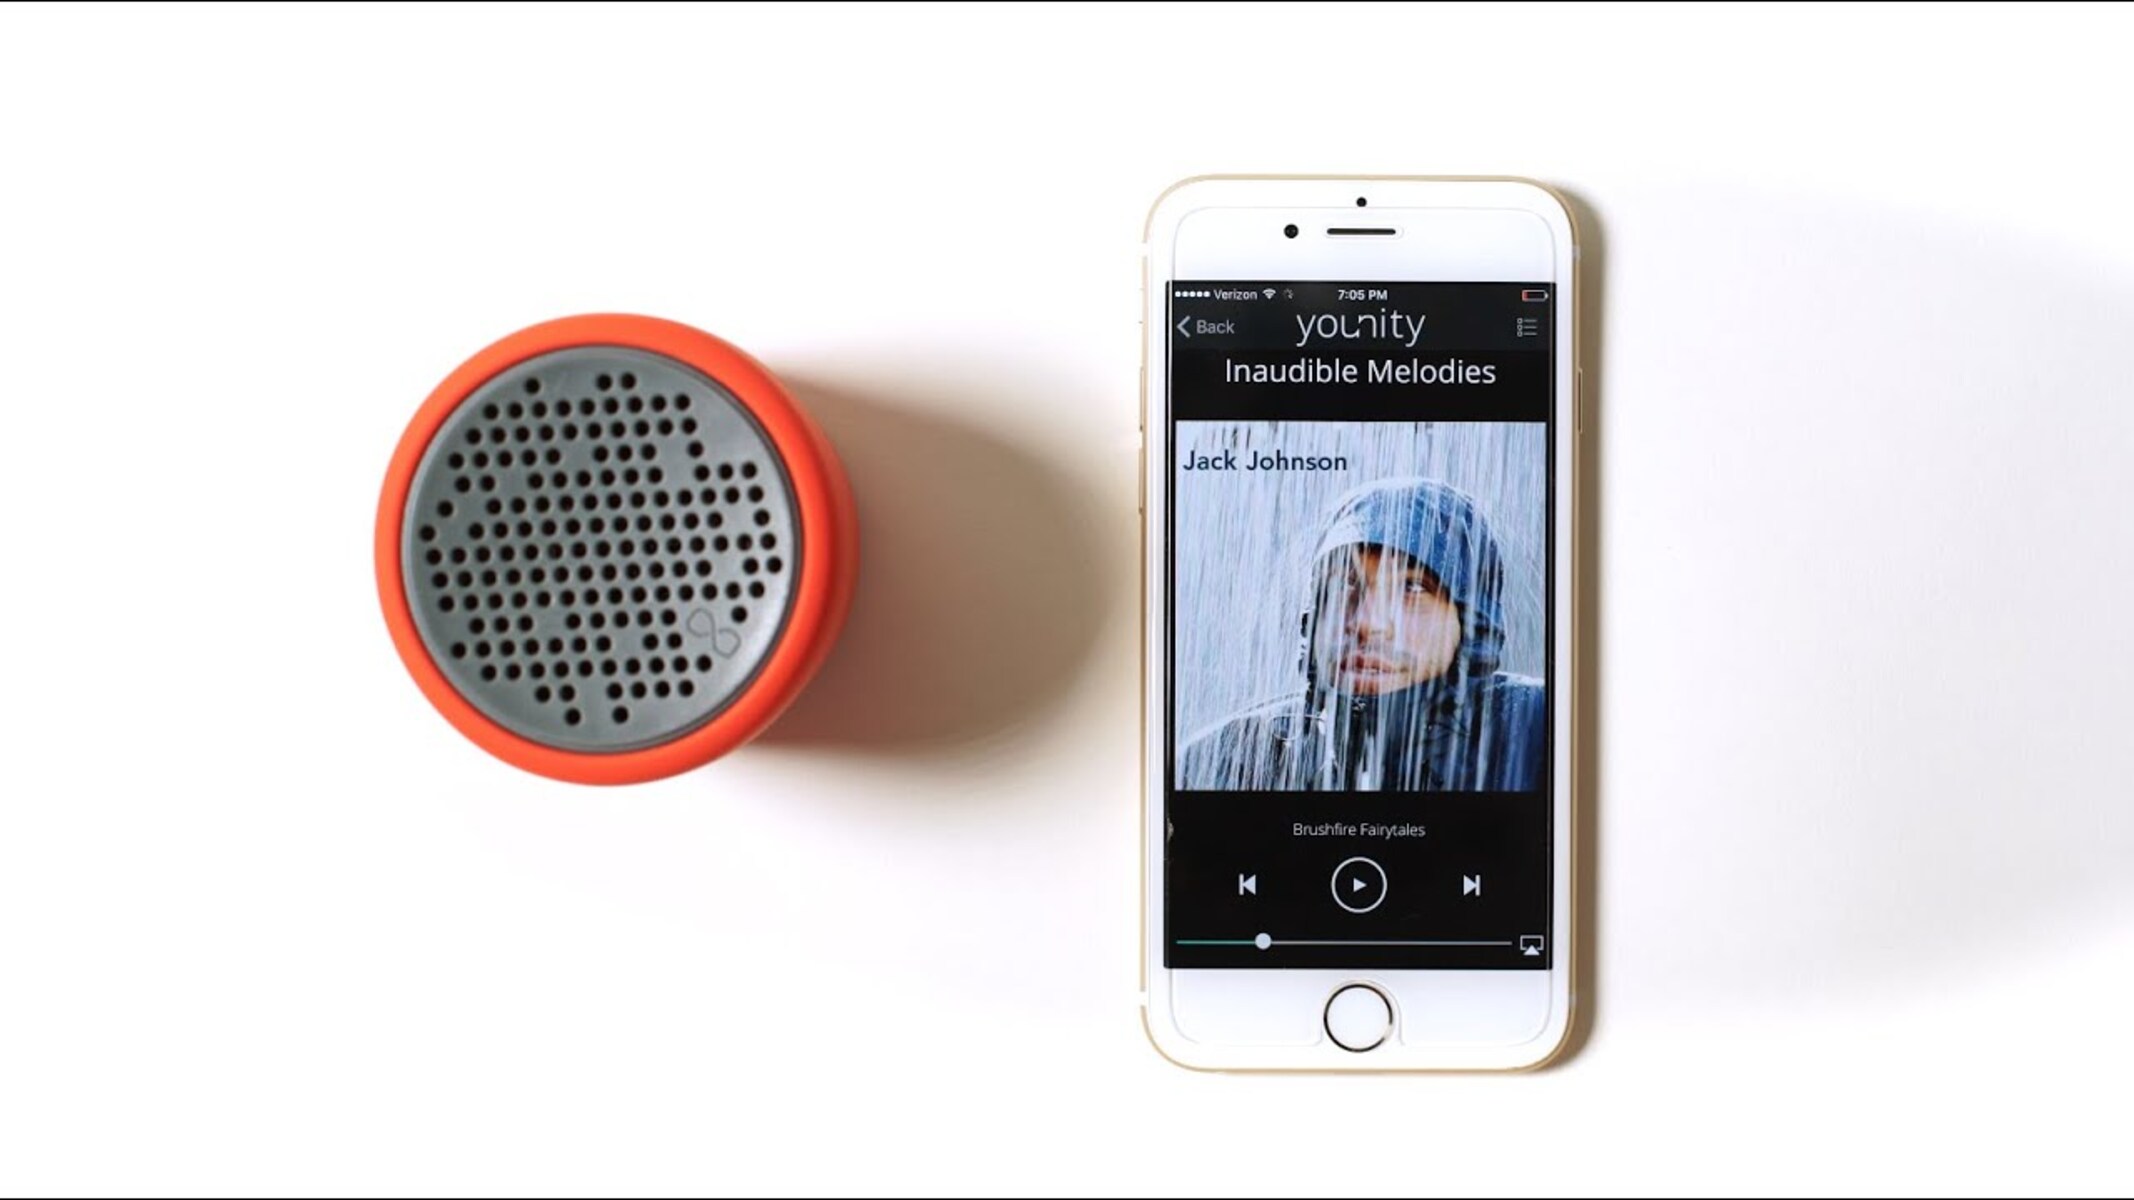 wireless-melodies-bluetooth-music-playback-from-your-iphone